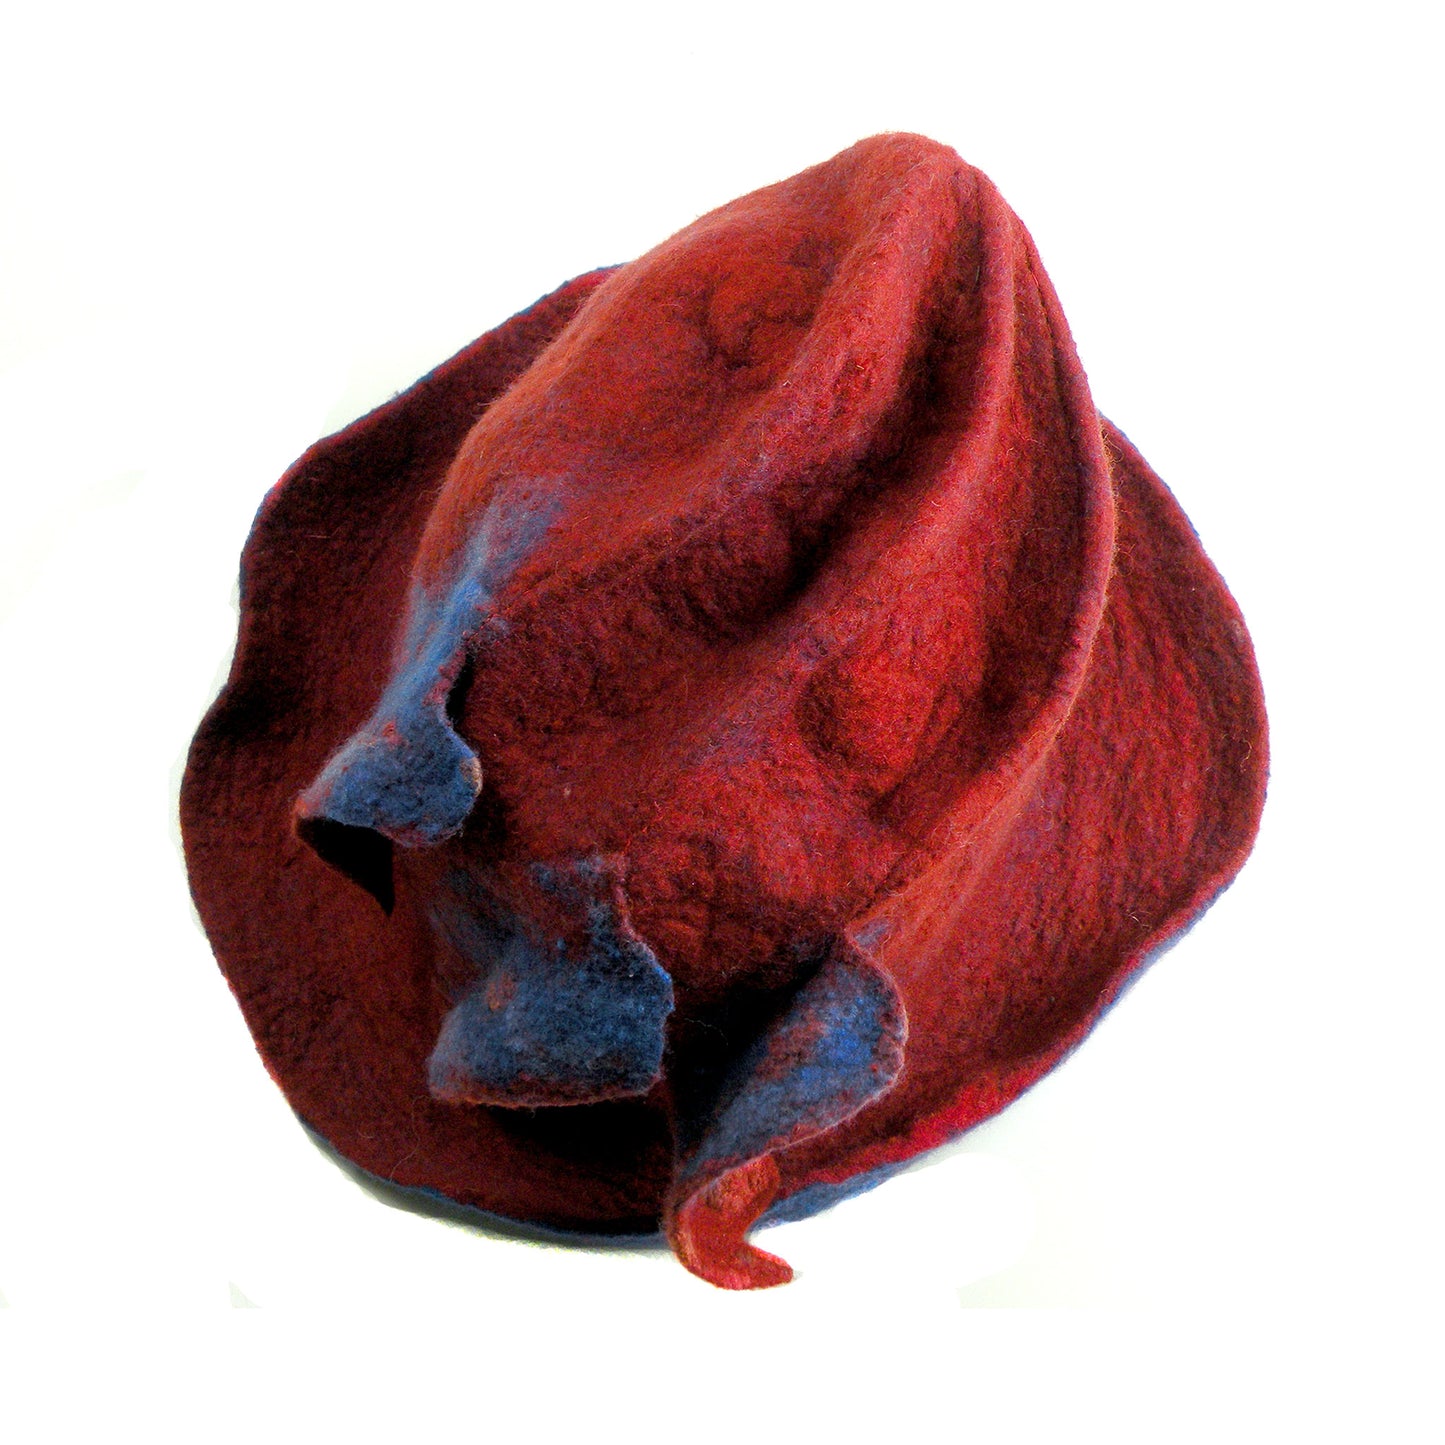 Big Brimmed Red and Blue Felted Hat - top view